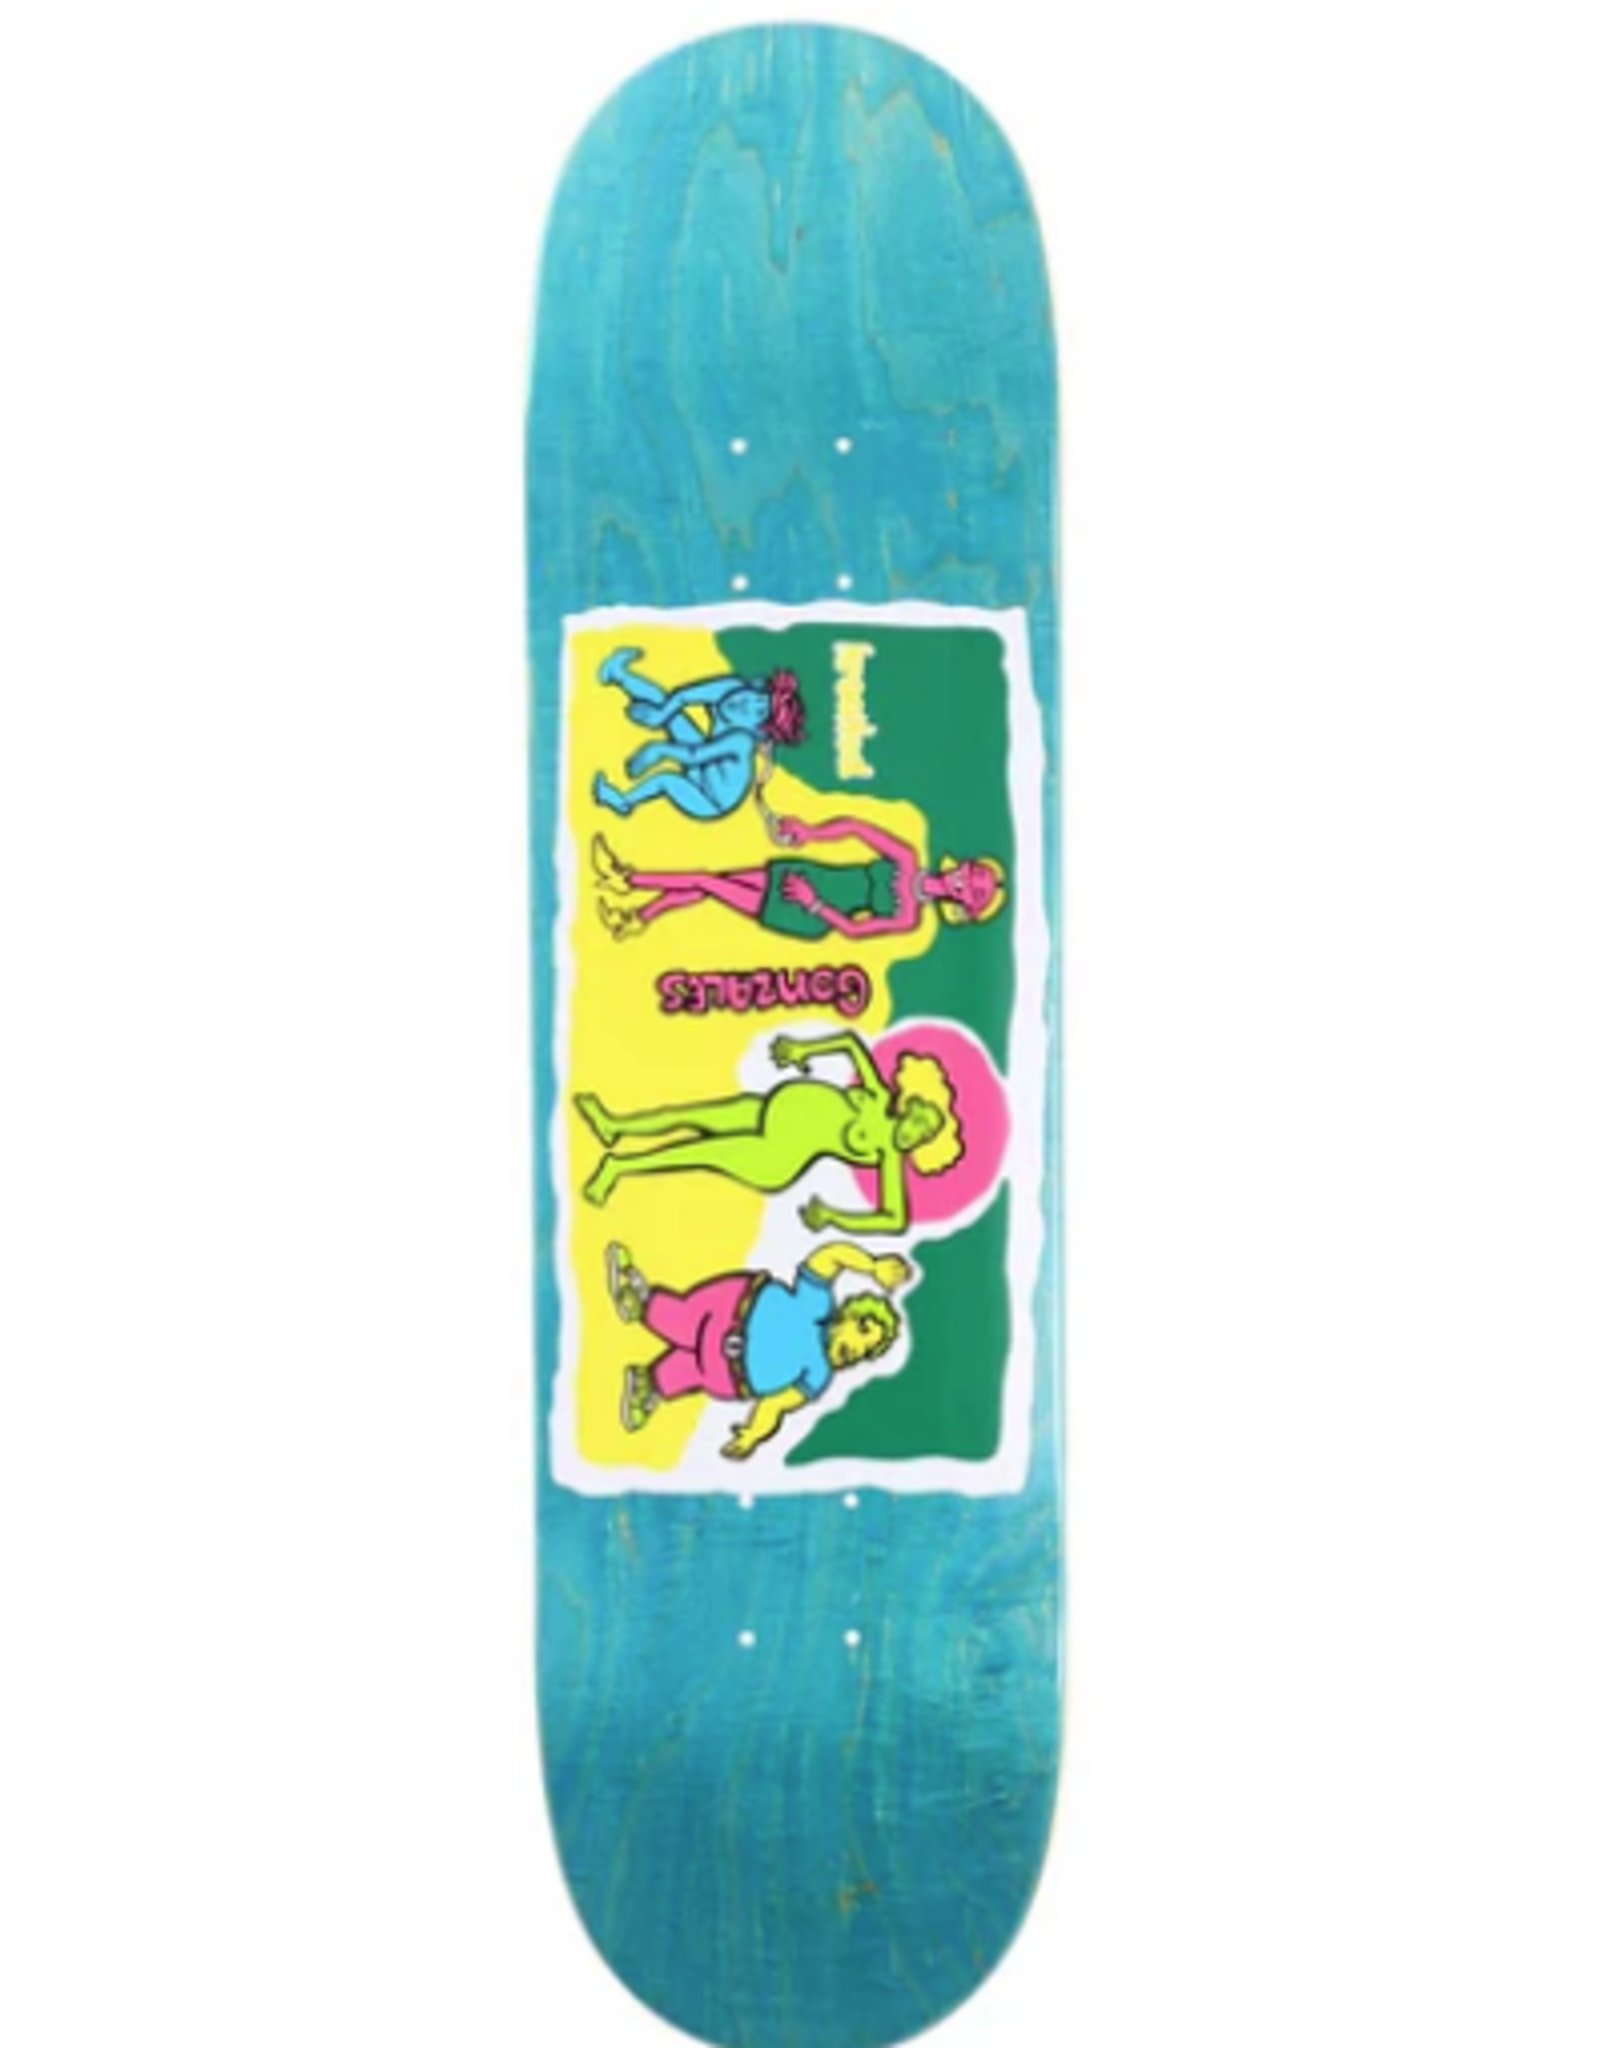 REAL KROOKED 8.5" GONZ FAMILY AFFAIR DECK (GREY STAIN)